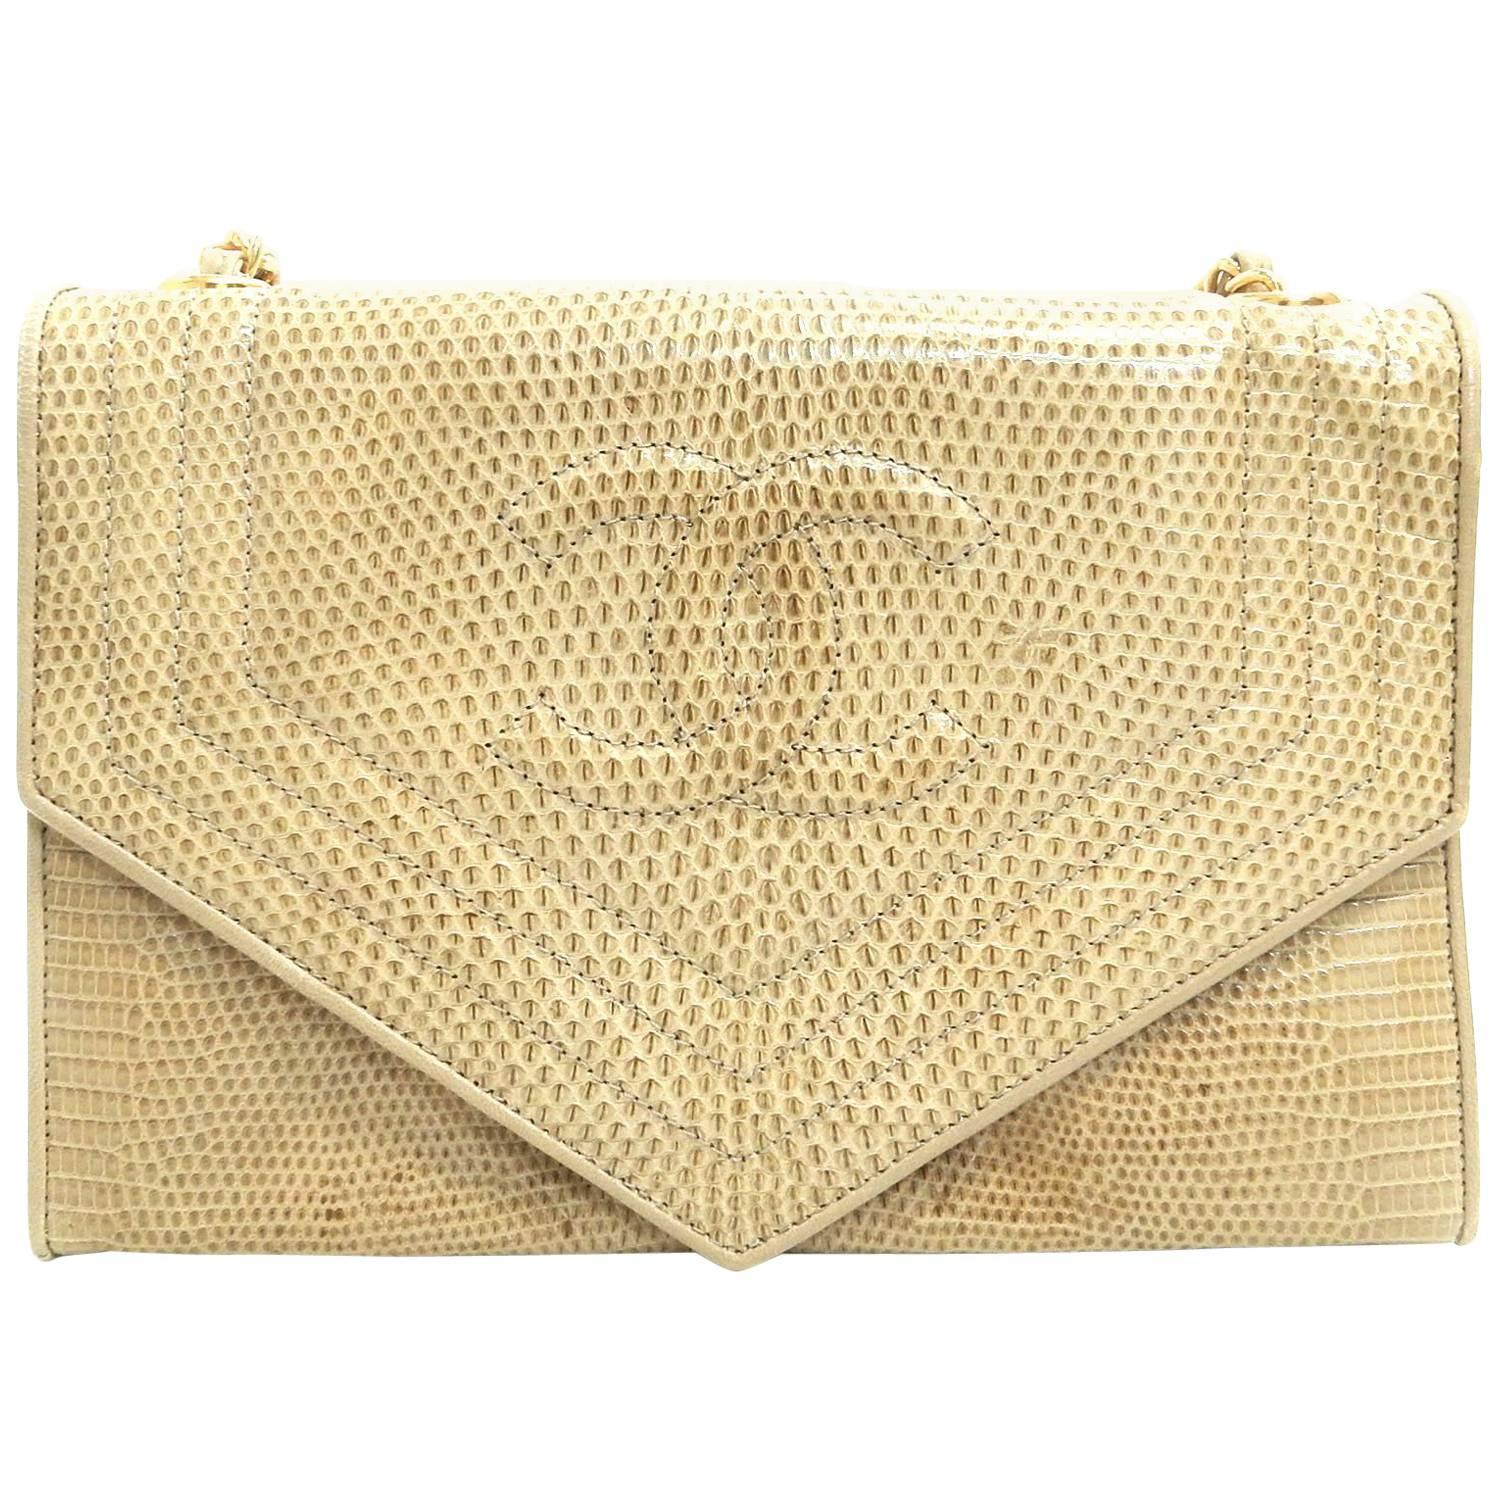 Chanel Ivory and Beige Lizard Leather Flap with Gold Chain Strap Shoulder Bag 